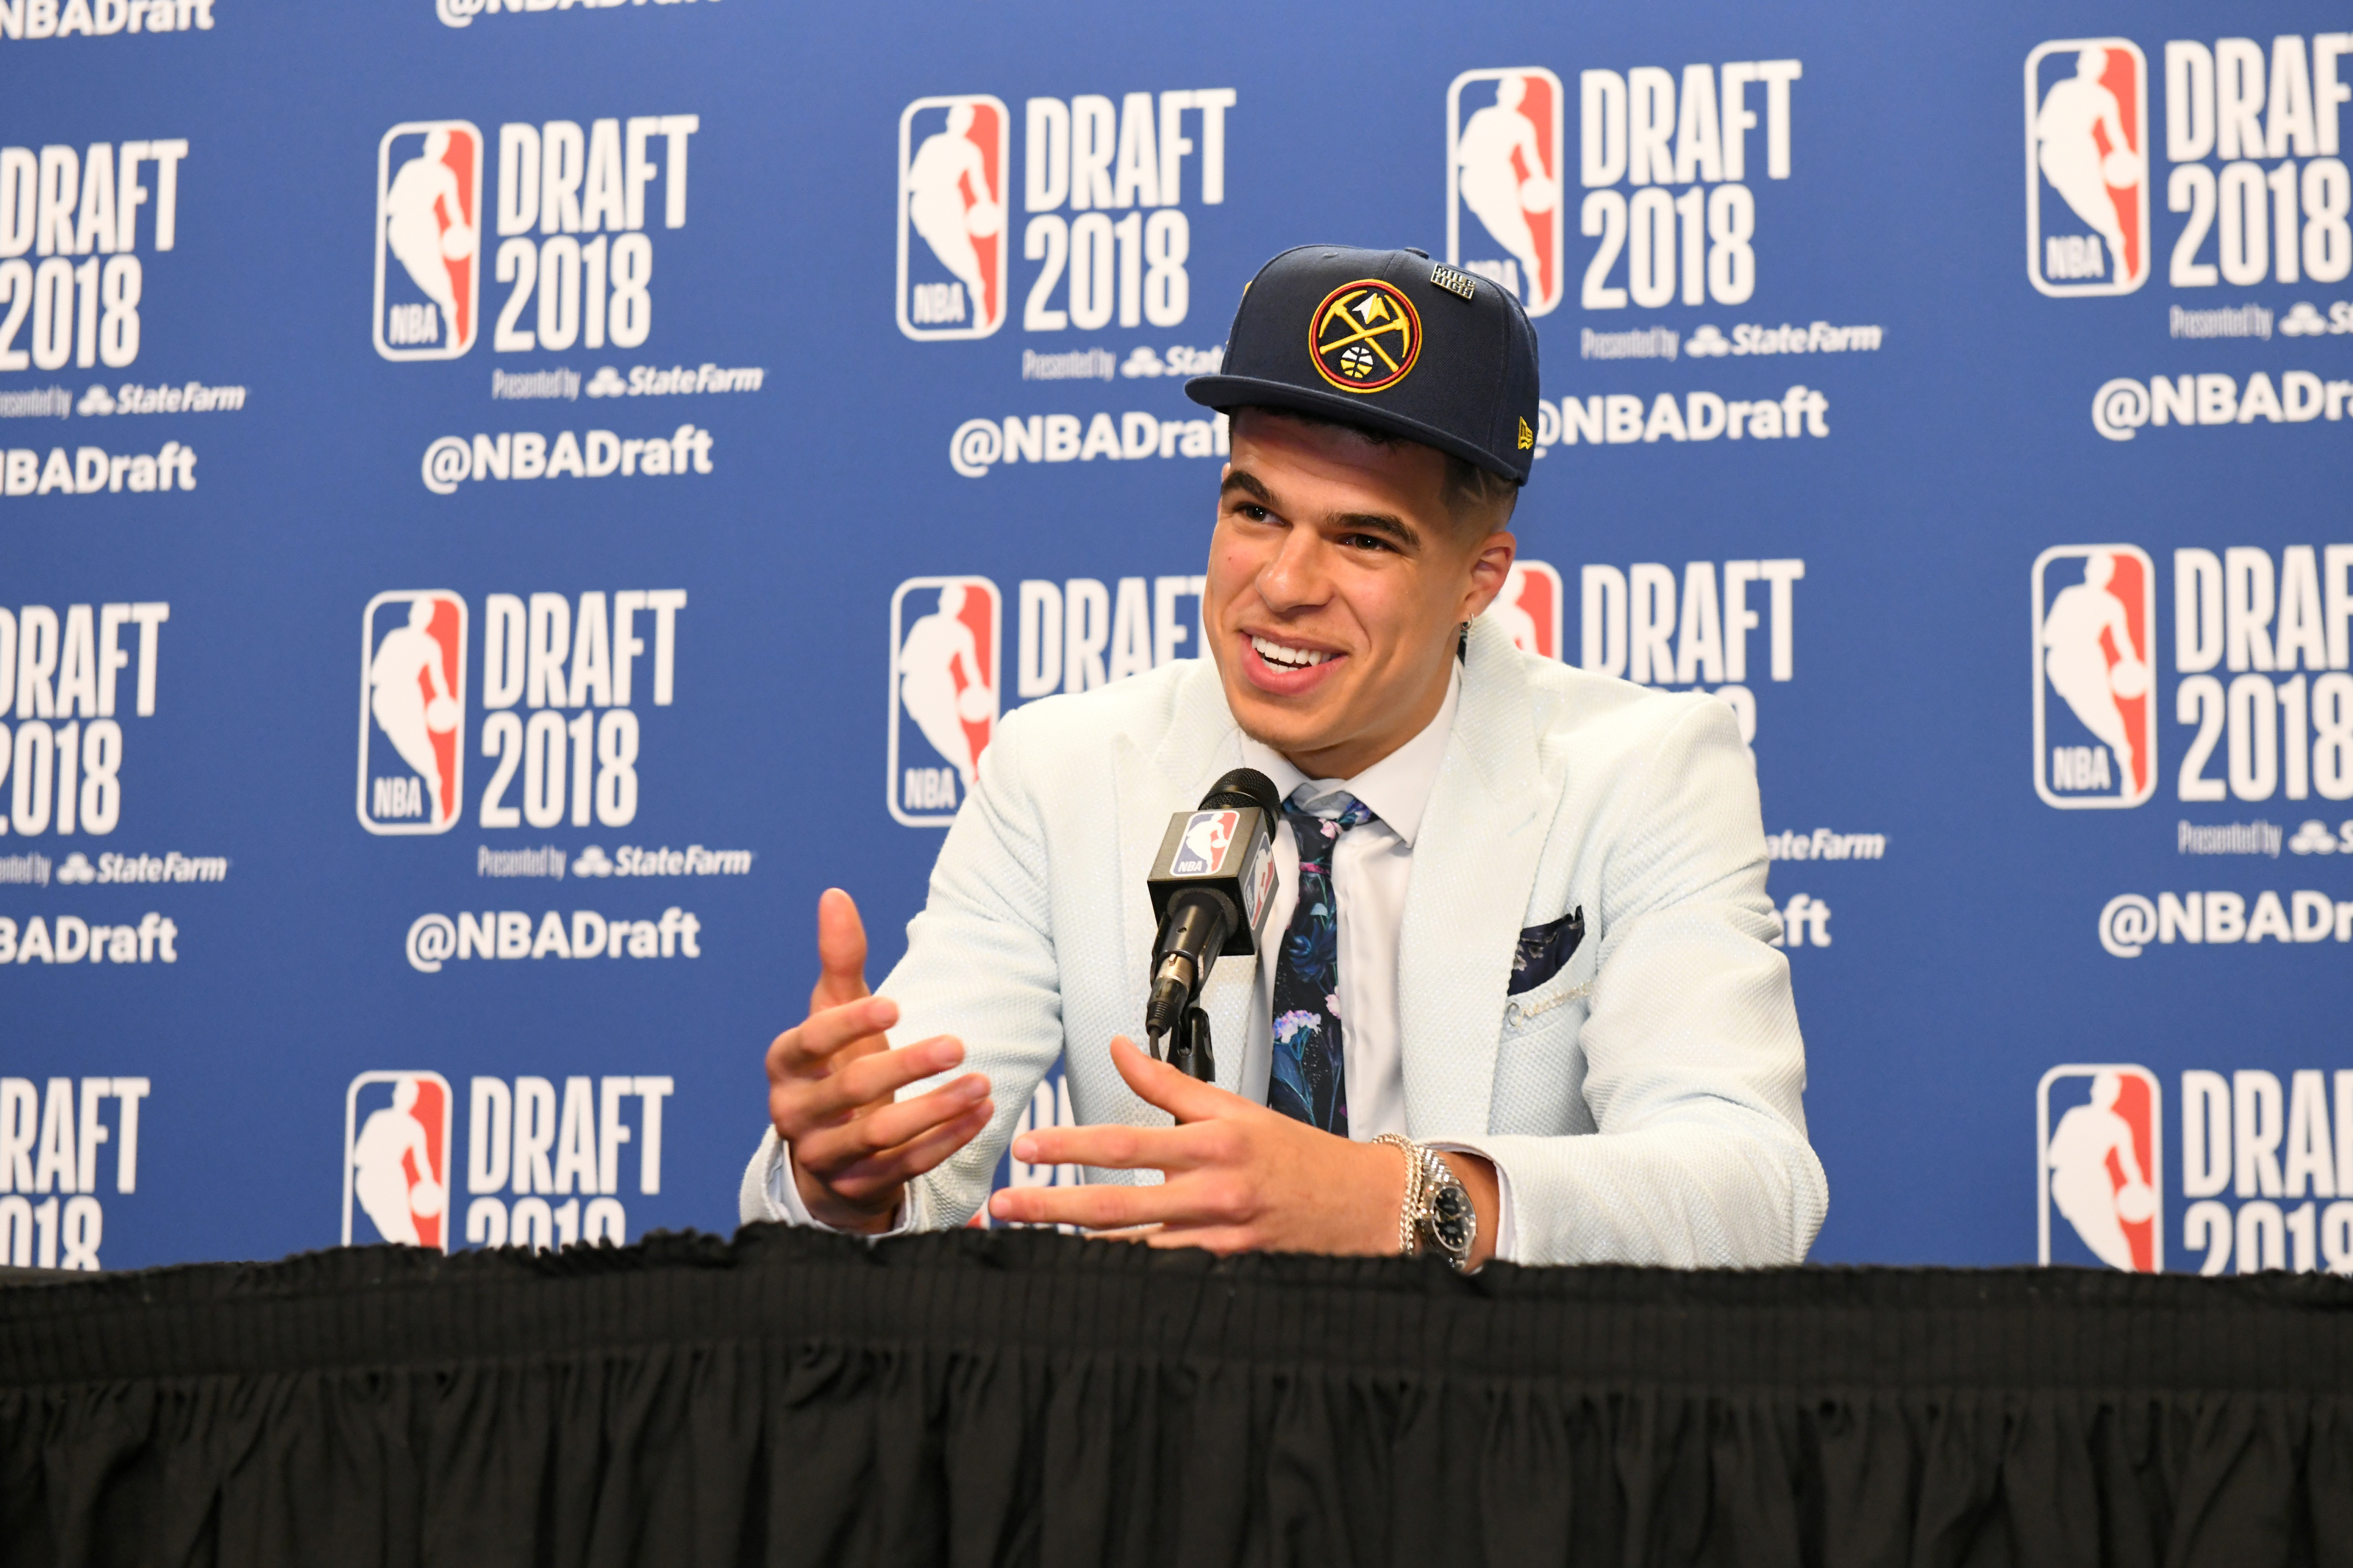 Michael Porter Jr. selected by Denver Nuggets with No. 14 overall pick in  NBA draft